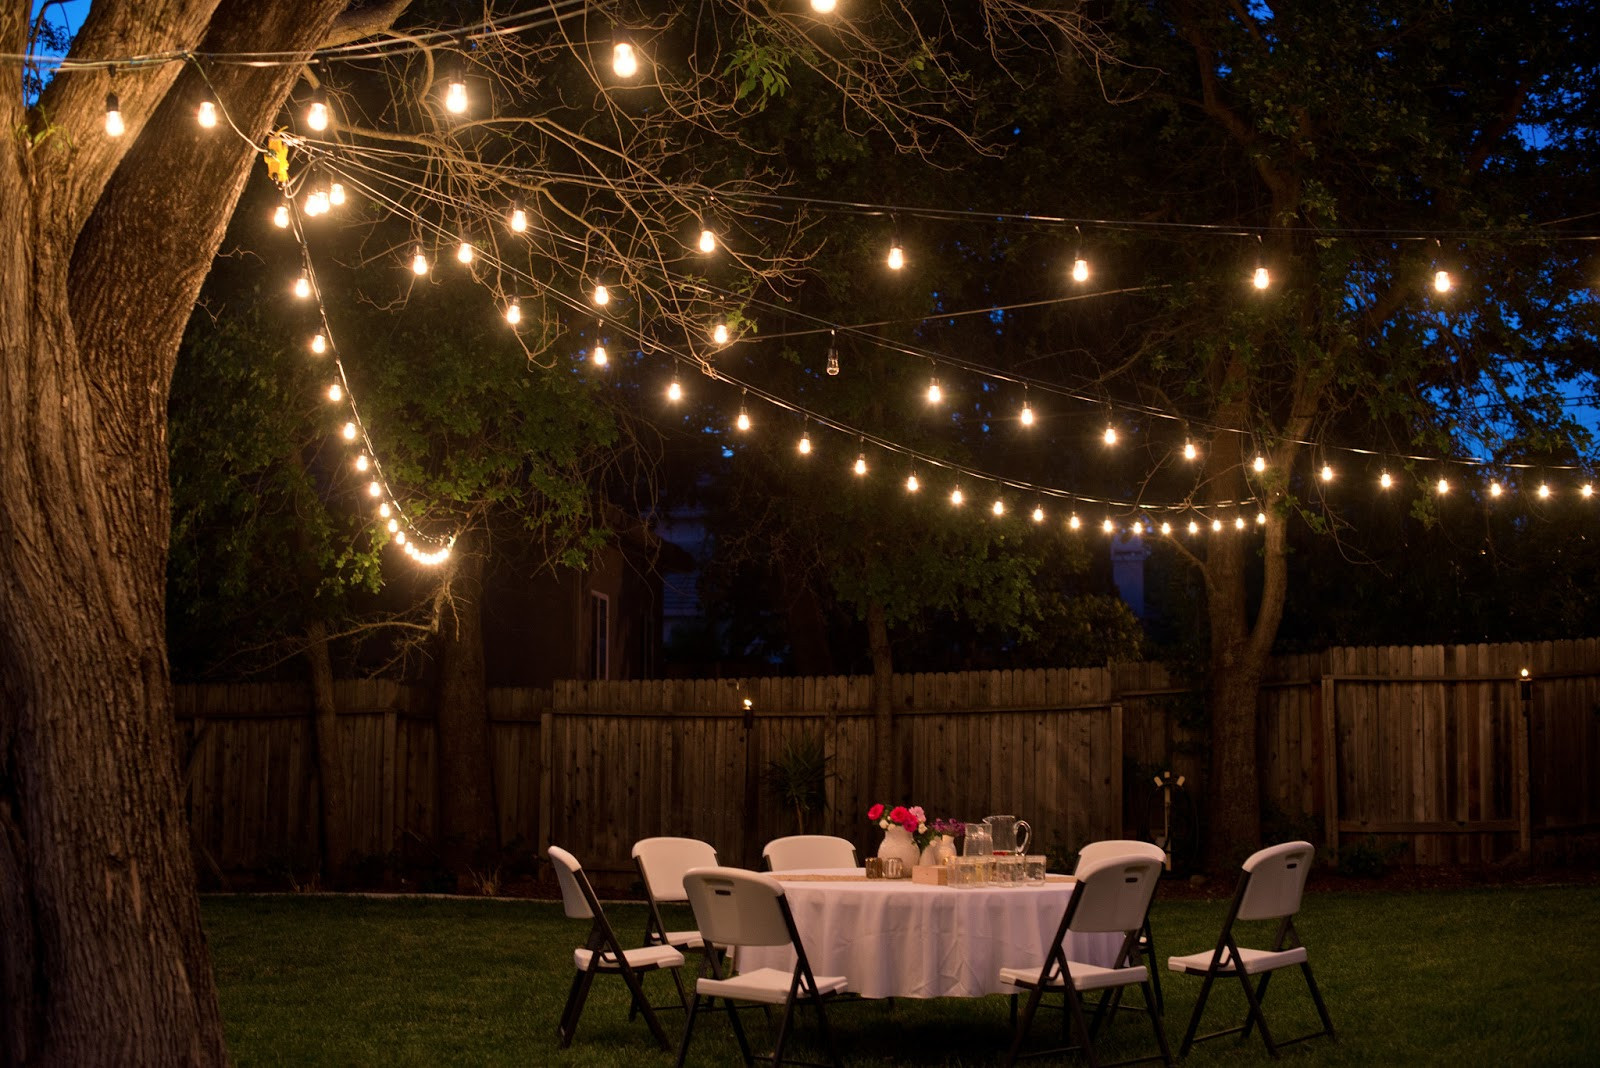 Backyard Lighting Ideas For A Party
 Domestic Fashionista Backyard Anniversary Dinner Party